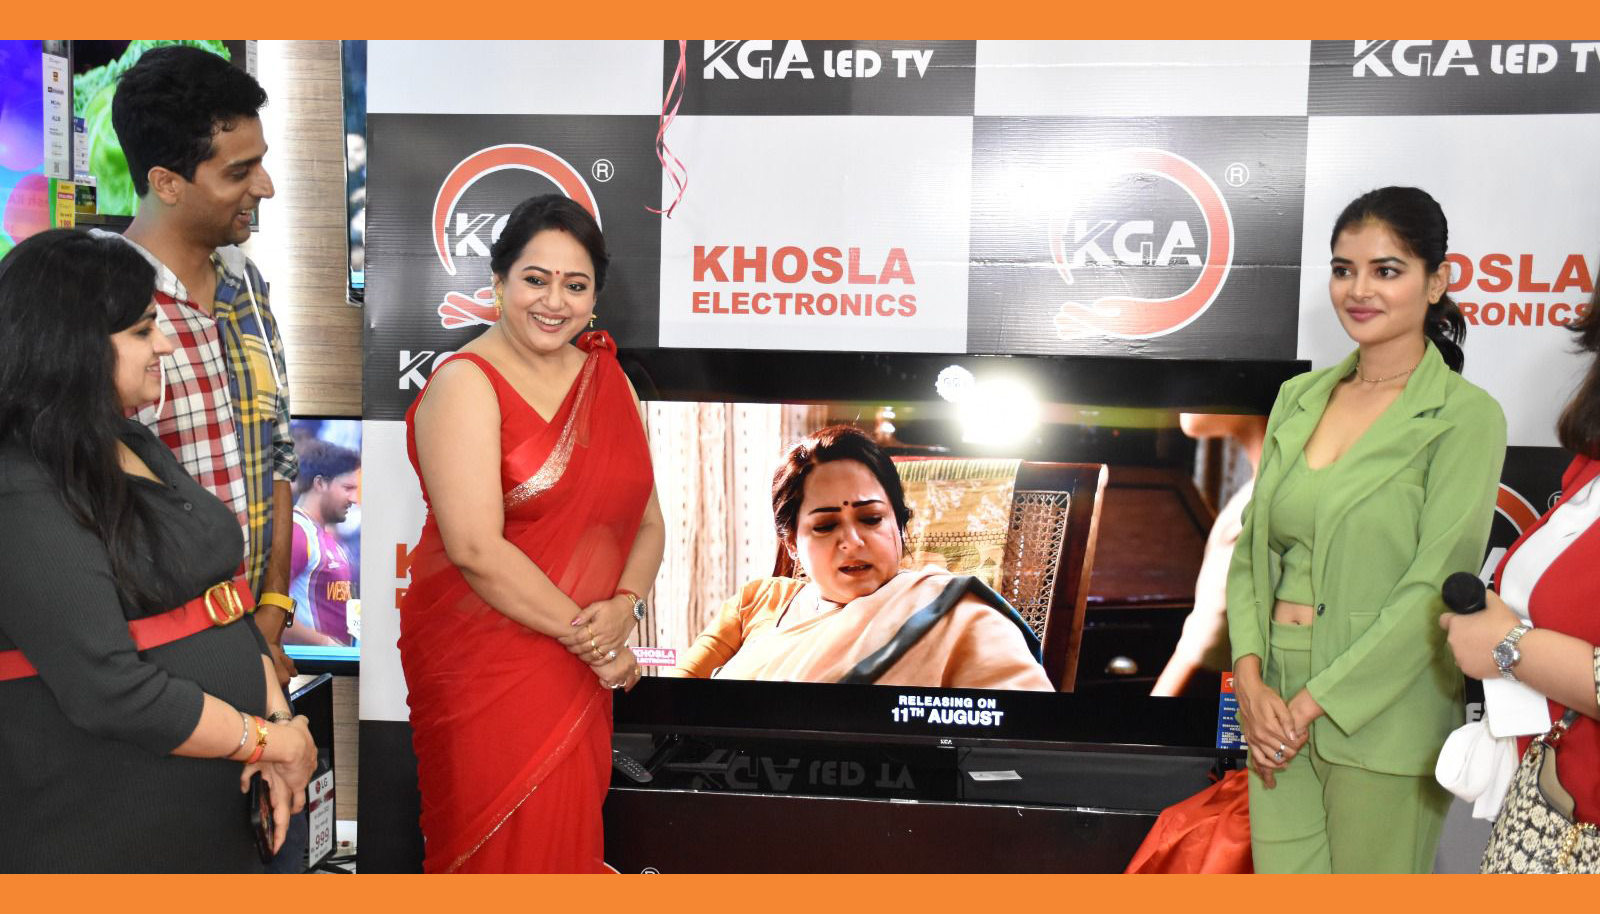 Khosla Electronics celebrates 9th Anniversary of its Lansdowne outlet by launching All-New KGA 4K SMART TV